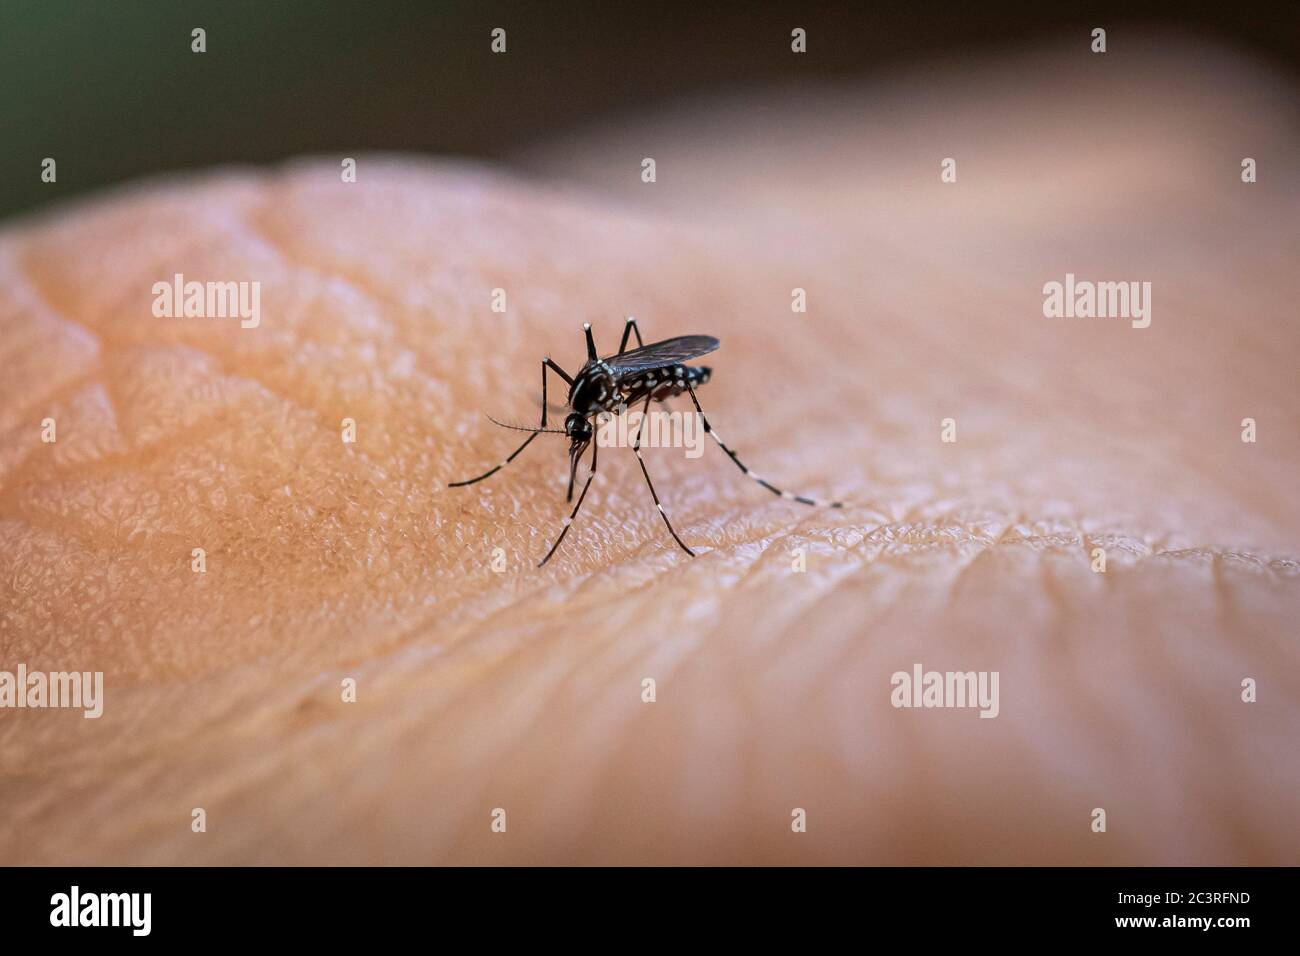 Aedes aegypti mosquito biting human skin. Transmitter of various diseases such as dengue, zika and chikungunya fever. Stock Photo